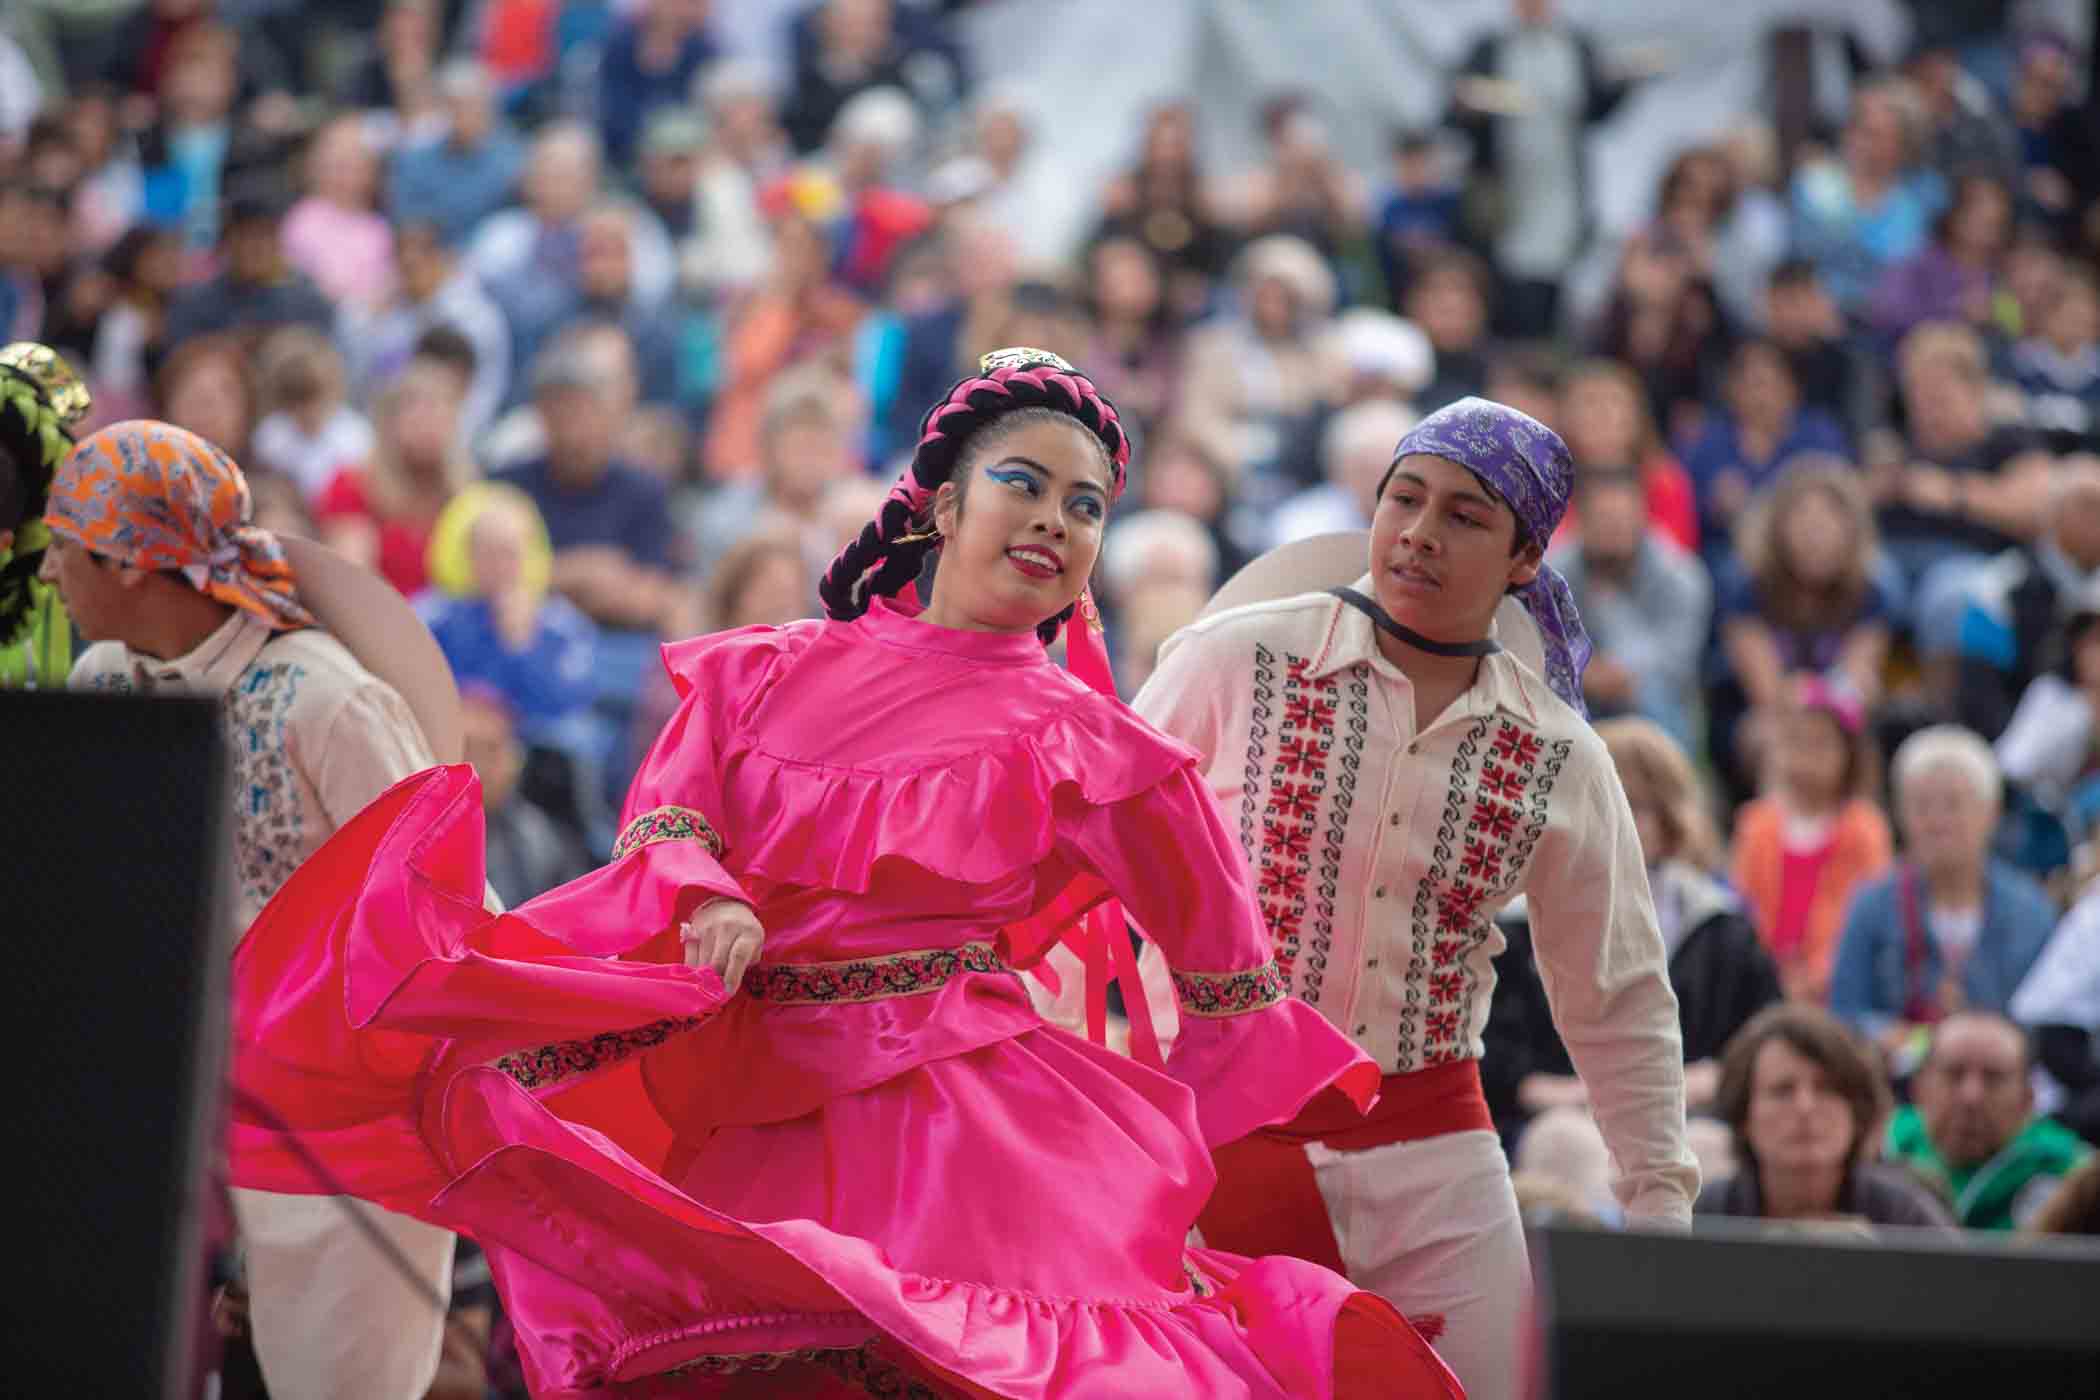 20 Ballet Folklorico Quetzalcoatl. Photo Courtesy Of The Mac And Cod